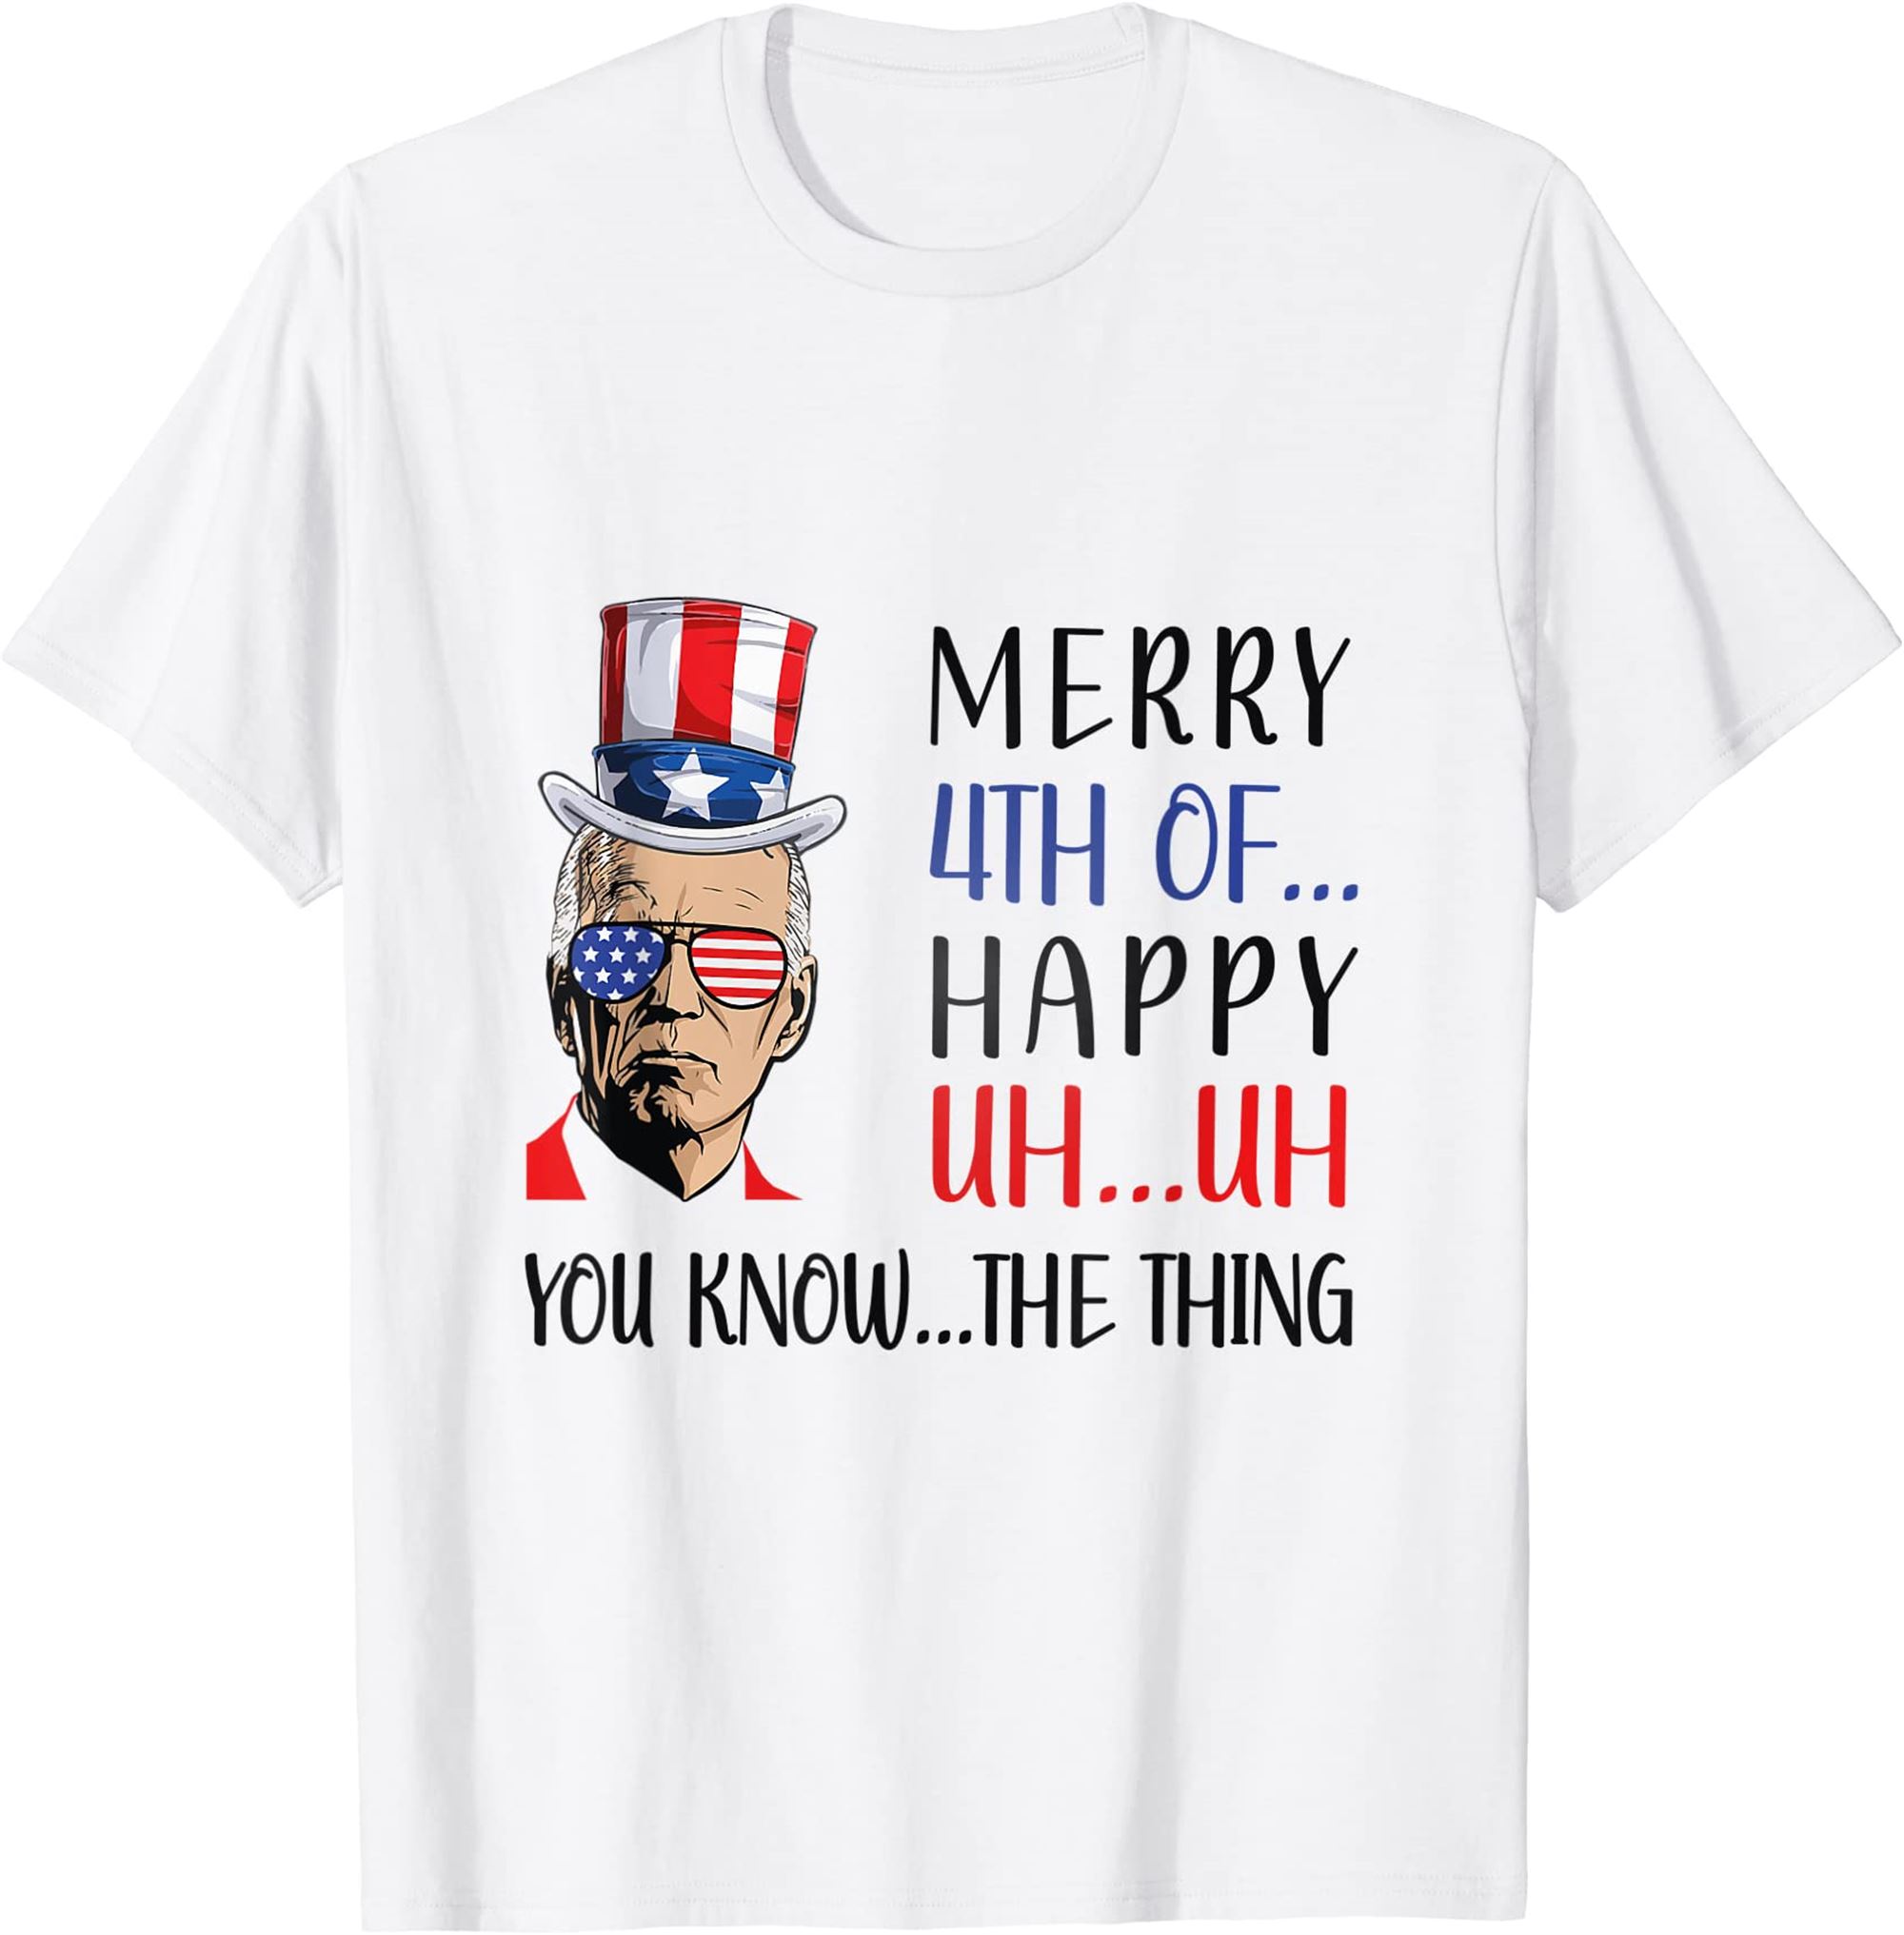 Funny Joe Biden Confused Merry 4th Of July Us Flag T-shirt Full Size Up To 5xl